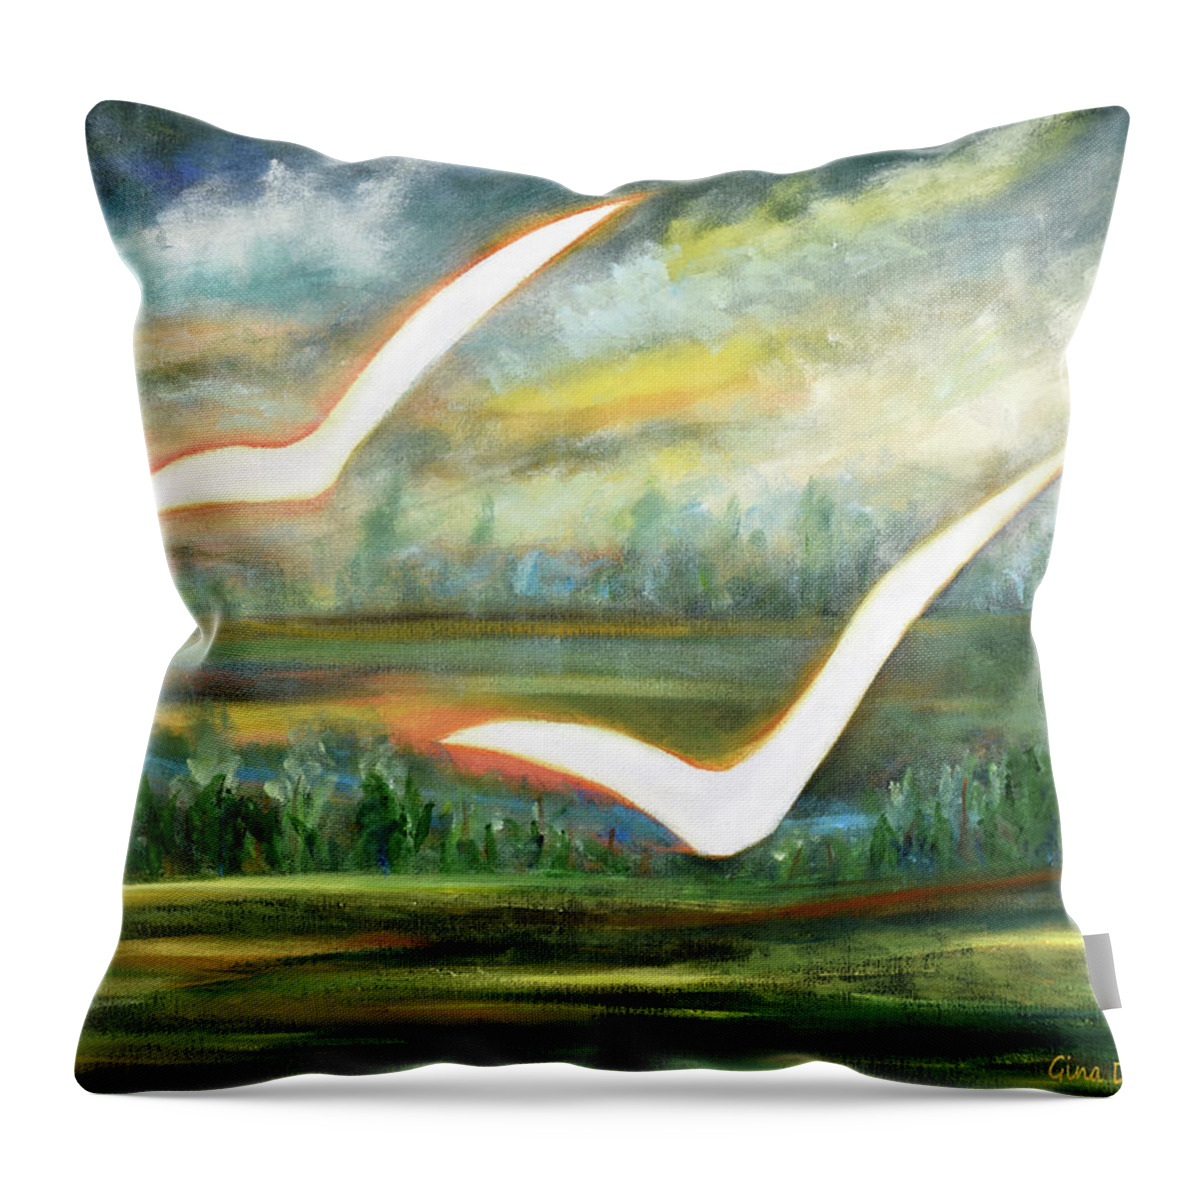 Two Throw Pillow featuring the painting Two White Birds by Gina De Gorna